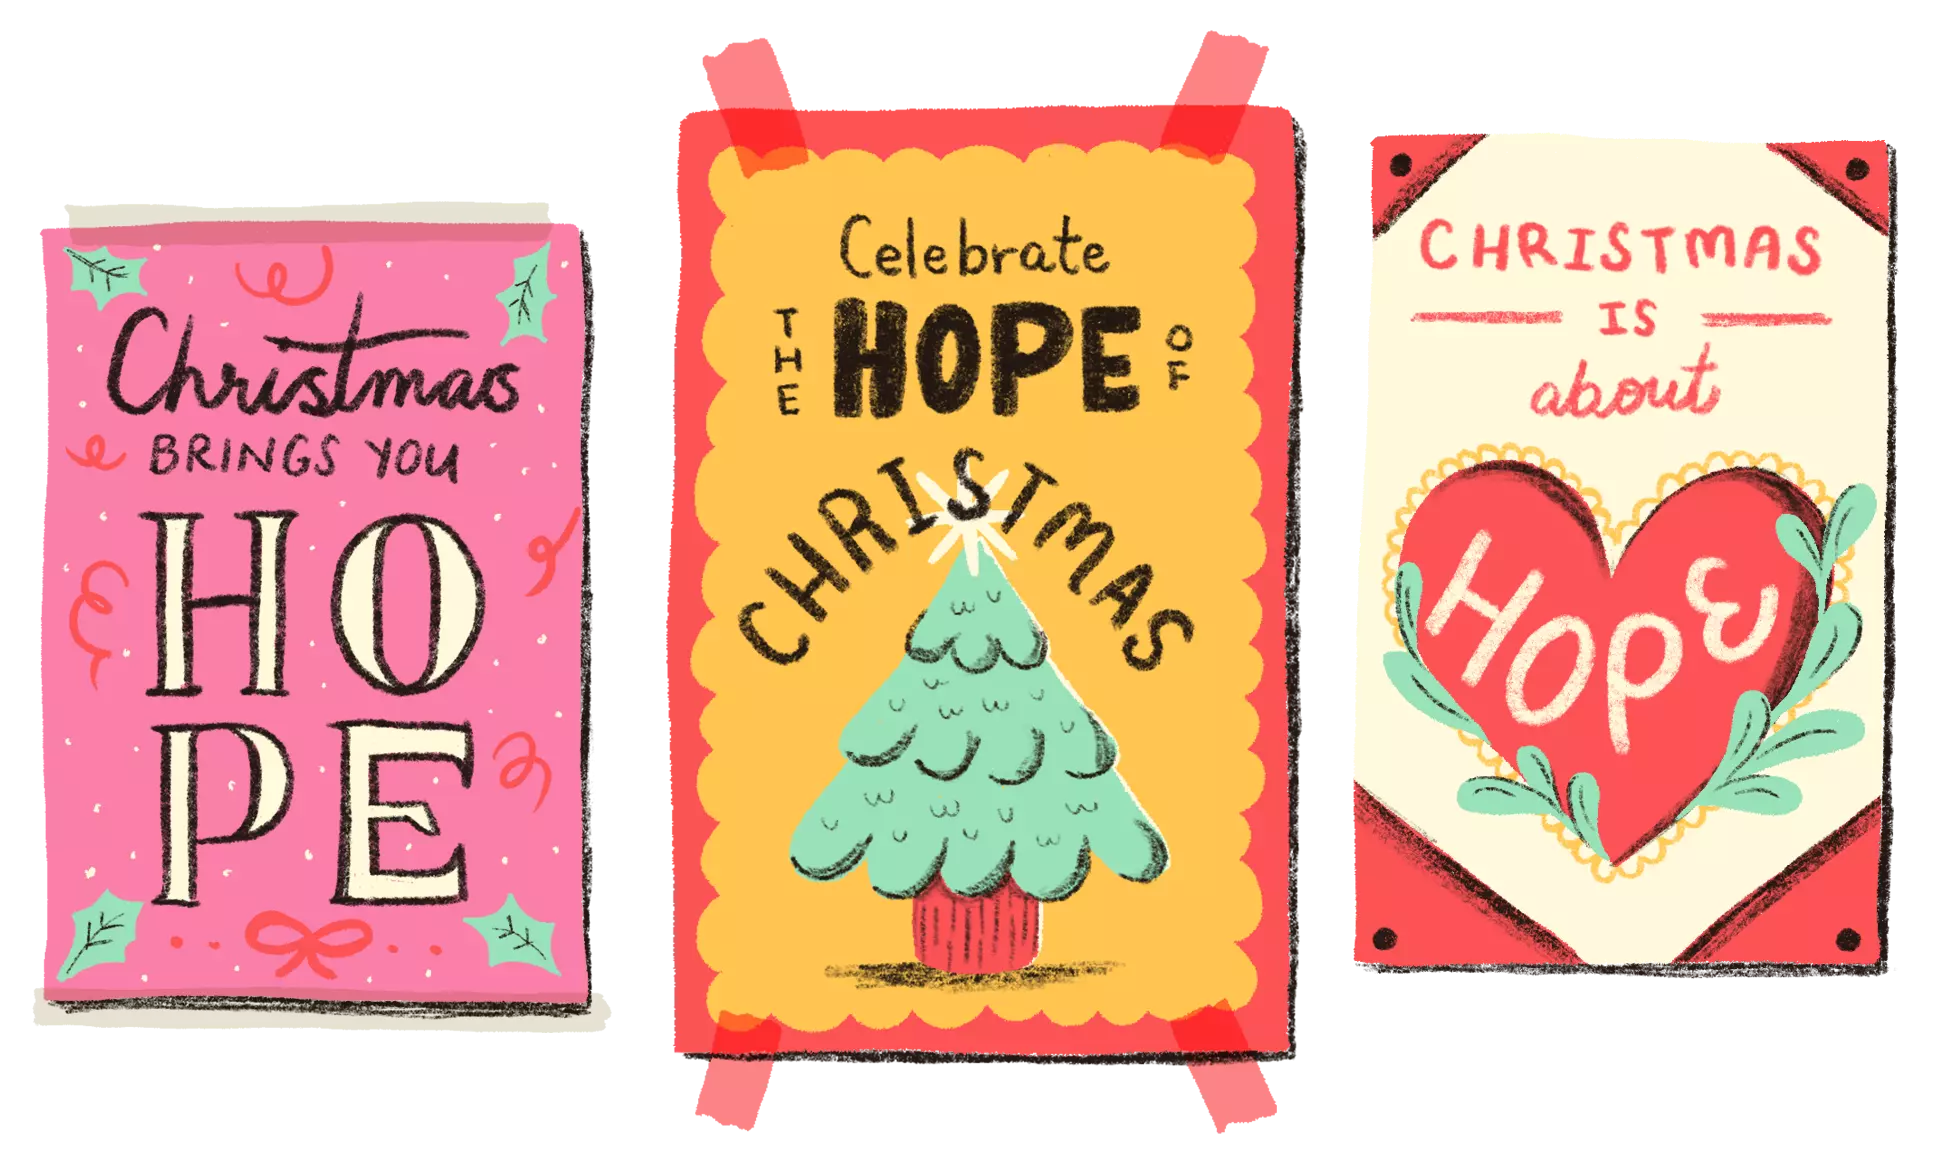 Christmas is about hope! Celebrate the hope of Christmas! Christmas brings you hope!